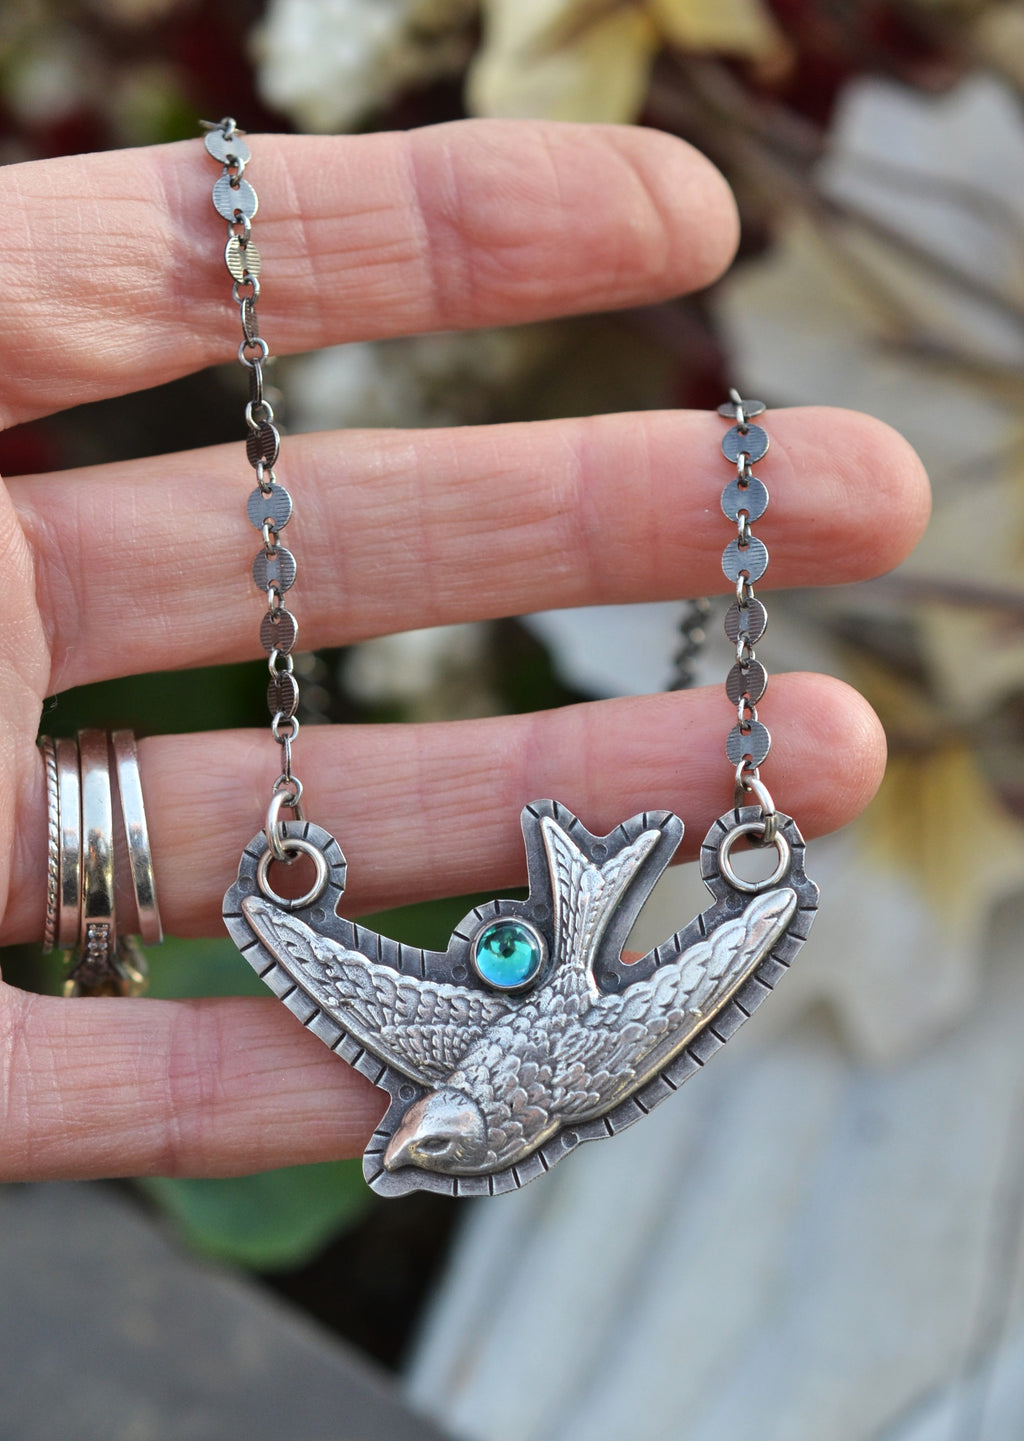 Tattoo Swallow Pendant - Rainbow Blue Topaz - Chain Included and Adjustable at 18" and 20"